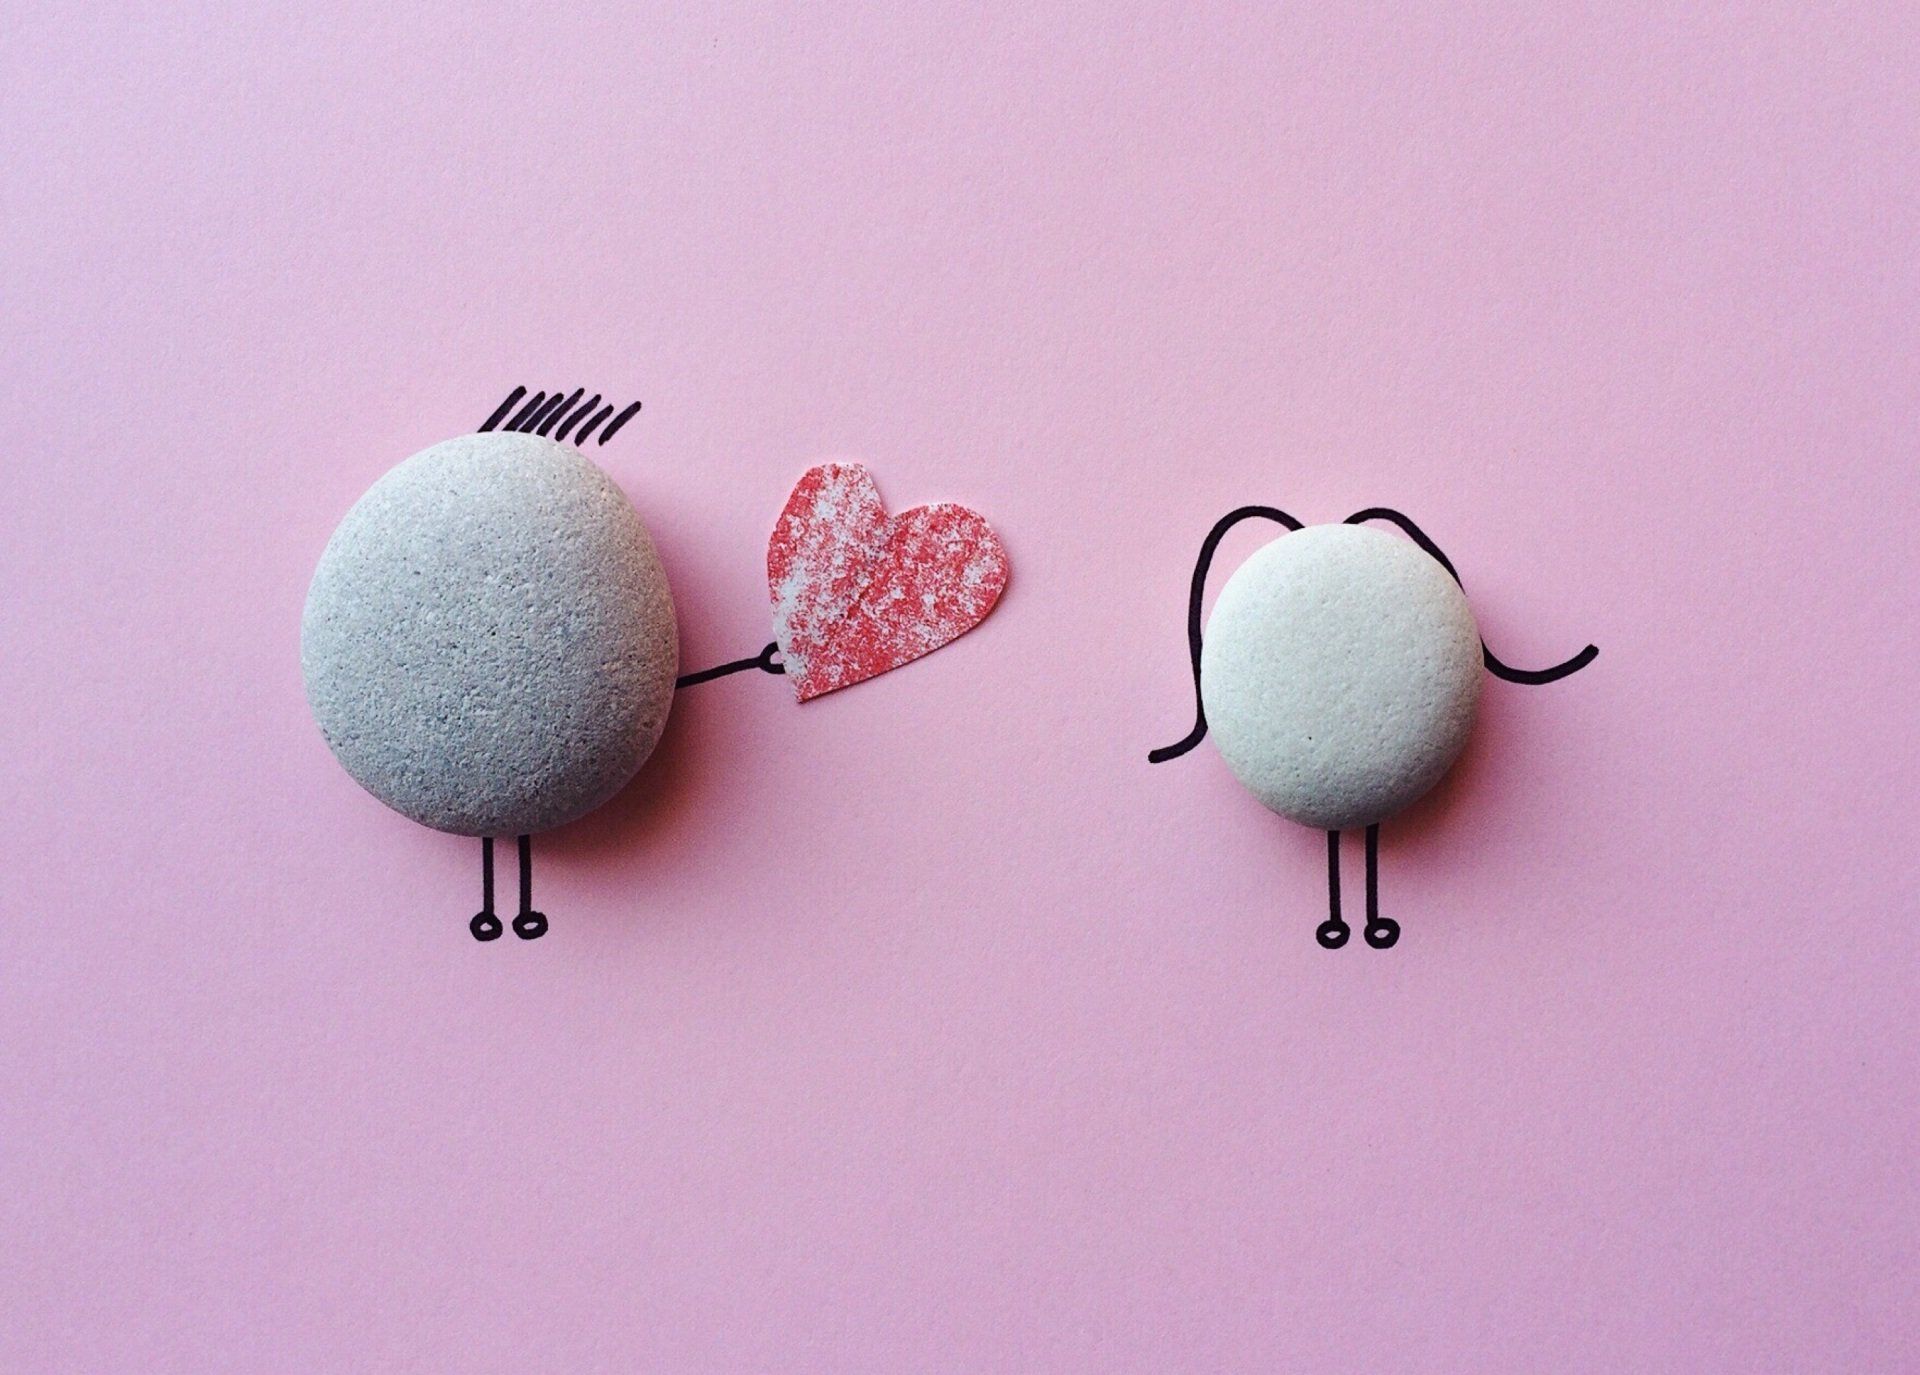 two rocks with arms and legs and a heart on a pink background .